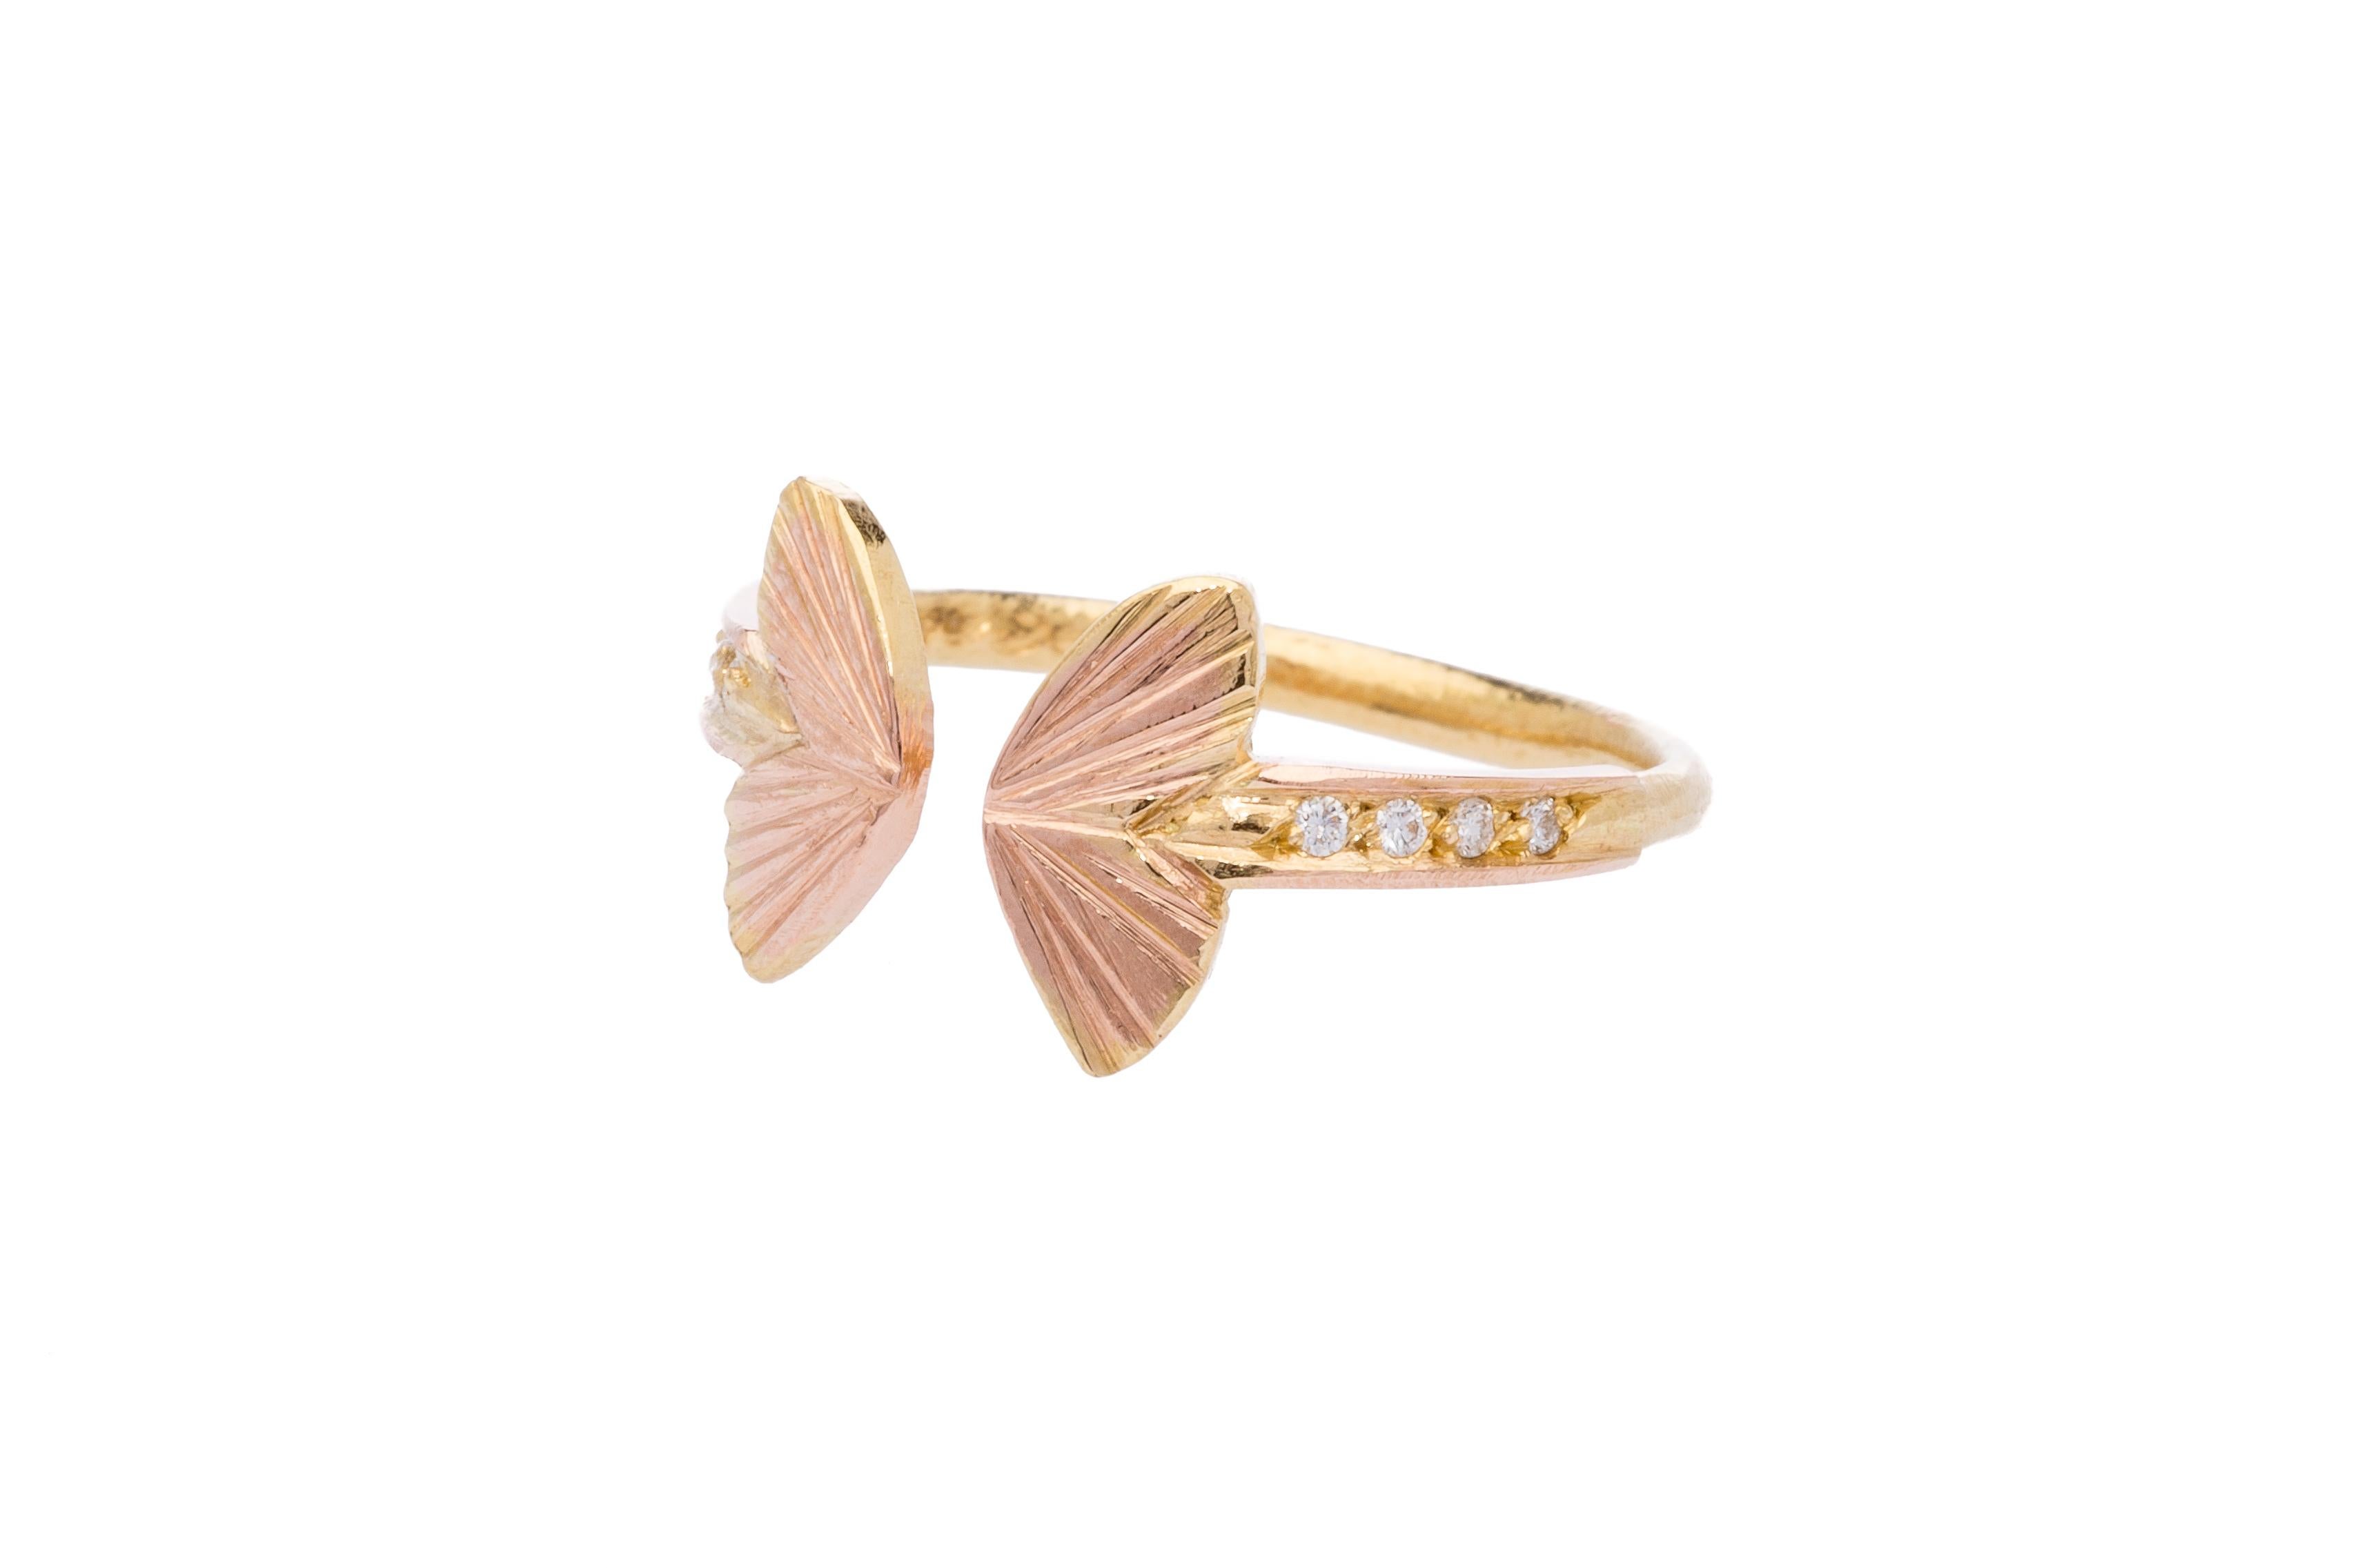 James Banks's signature butterfly ring features two Baby Asterope butterfly wings with space in between, set in 14k Rose Gold and set on a solid 18k Yellow Gold band with white diamond pave 
14k Rose Gold, 18k Yellow Gold, White Diamonds 
Handmade